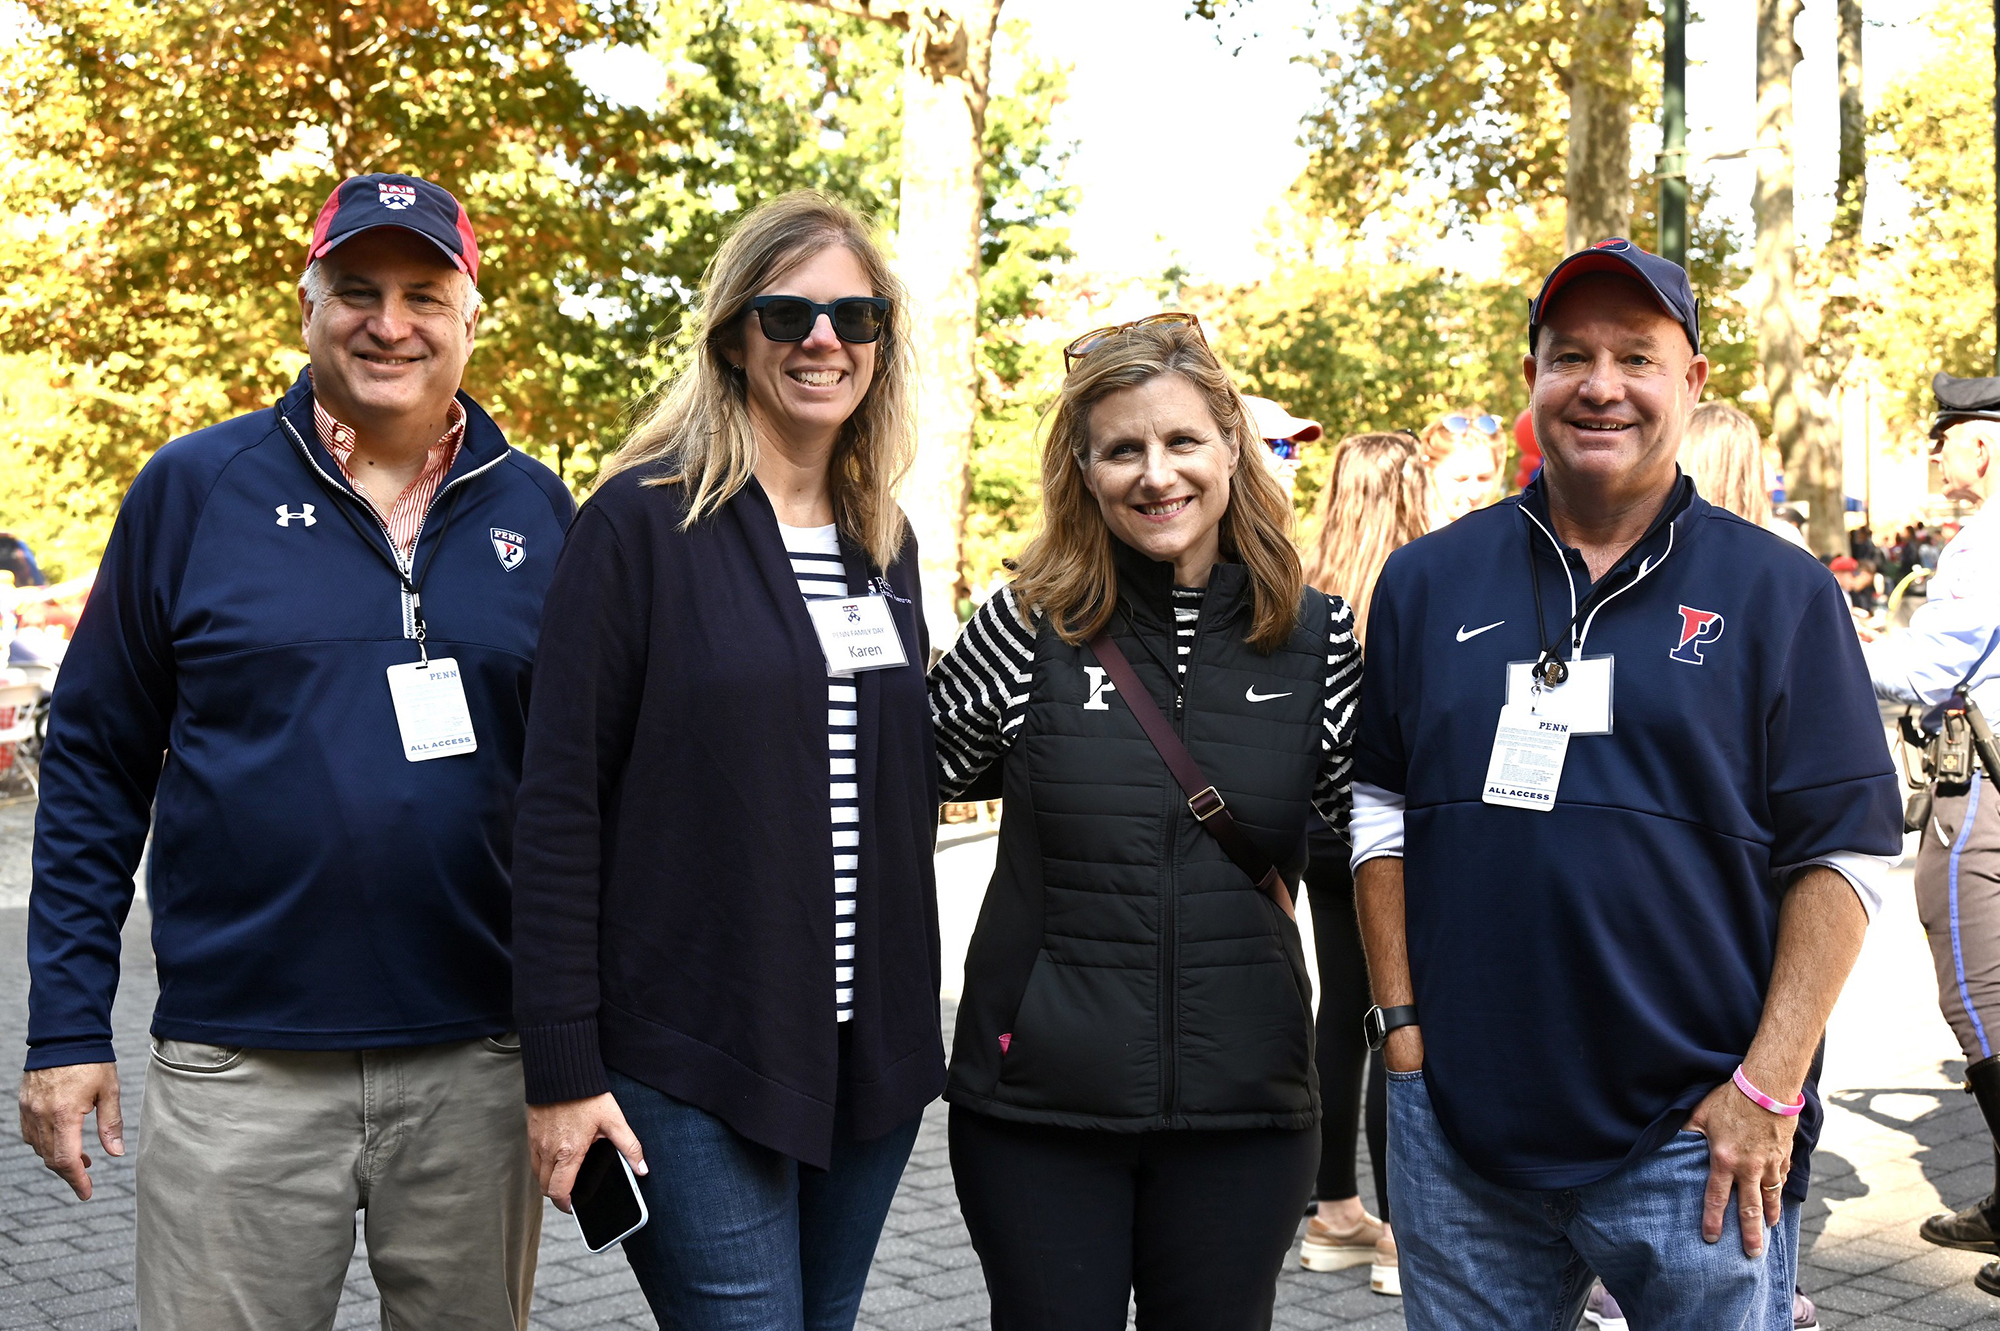 Craig Carnaroli (left) and Liz Magill (second from right) with two others at Penn Friends and Family Day.